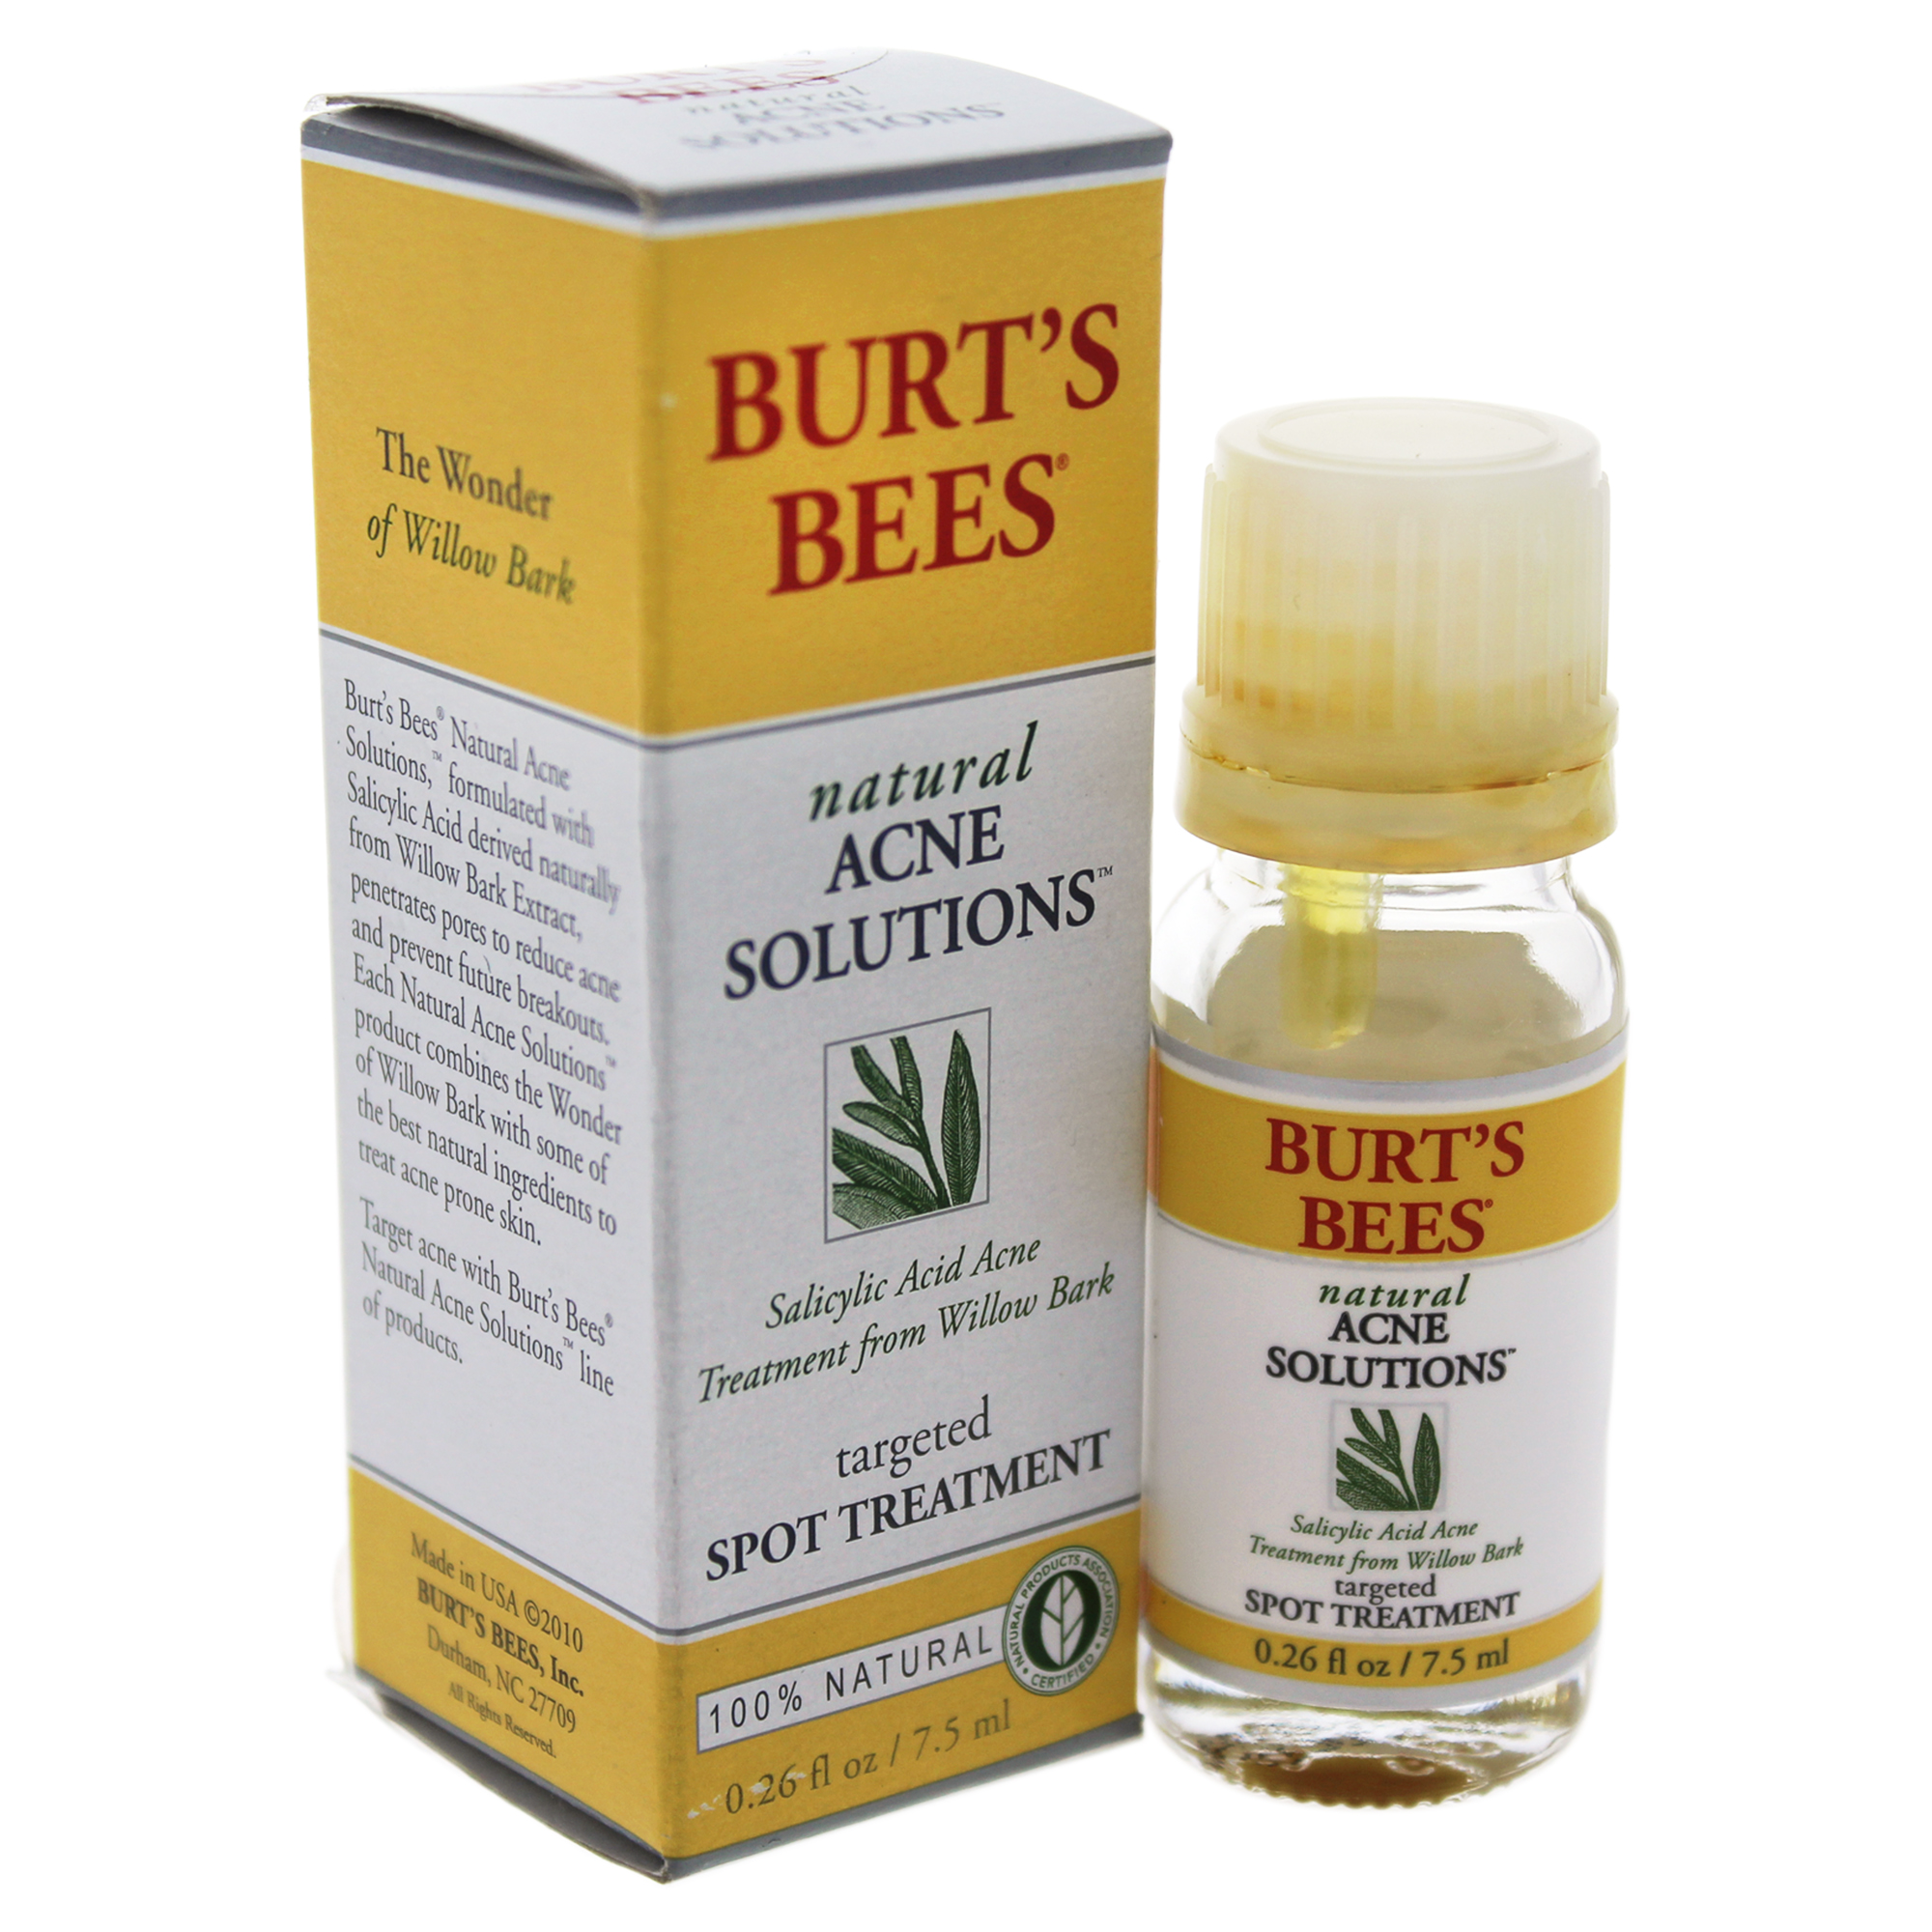 Natural Acne Solutions Targeted Spot Treatment by Burt's Bees for Unisex - 0.26 oz Treatment - image 1 of 7